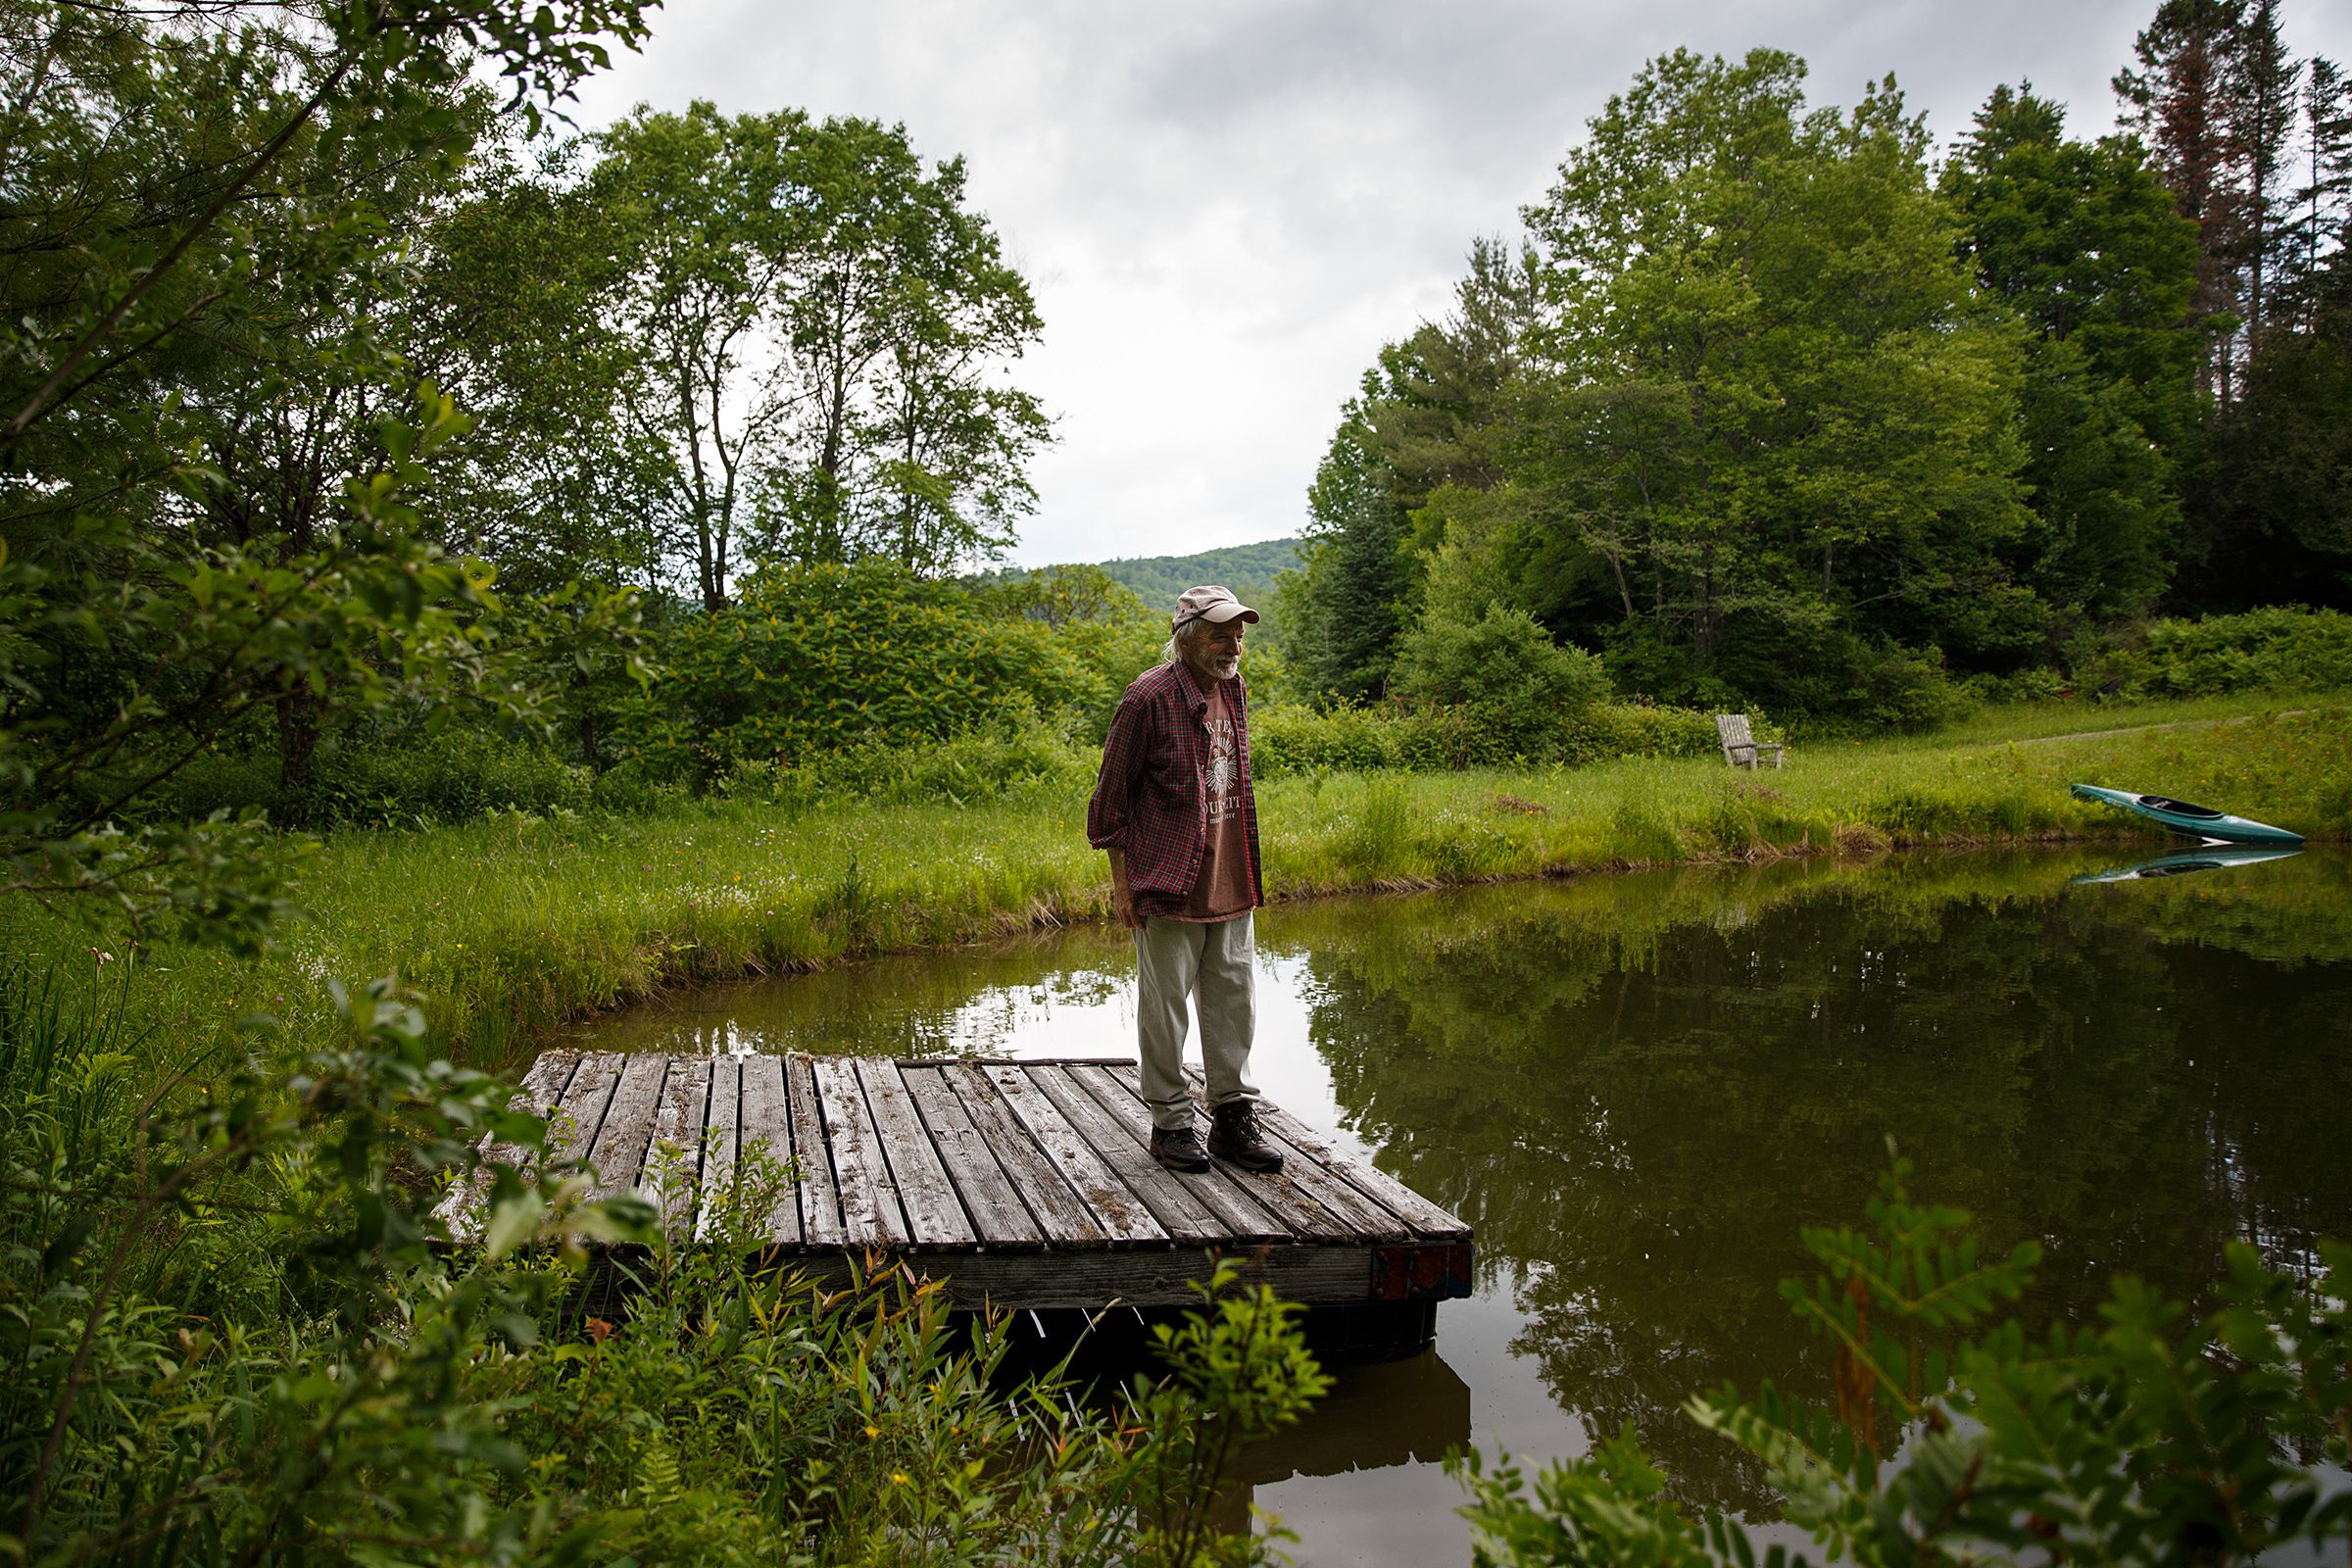 Tim Matson stands on the dock of the pond at his home in Strafford, Vt., on Monday, June 28, 2021. Matson designed the pond in the 1970s and swims in it every day in the summer. (Valley News / Report For America - Alex Driehaus) Copyright Valley News. May not be reprinted or used online without permission. Send requests to permission@vnews.com.